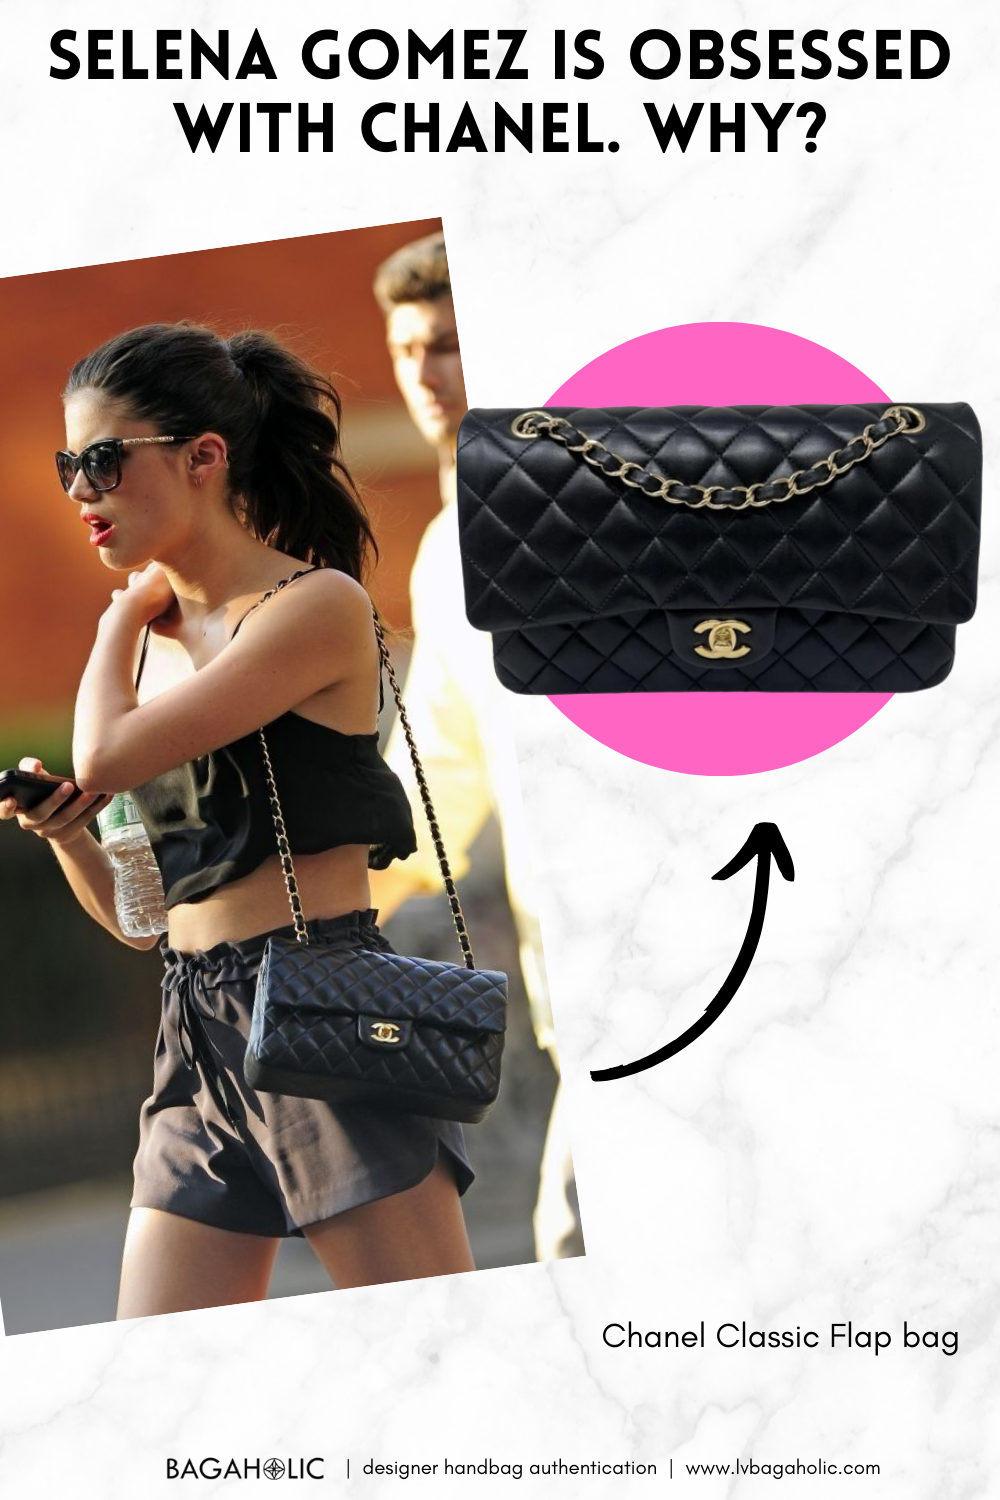 100 Celebs and Their Favorite Chanel Bags (Part 1) SELENA GOMEZ FAVOURITE CHANEL BAGS